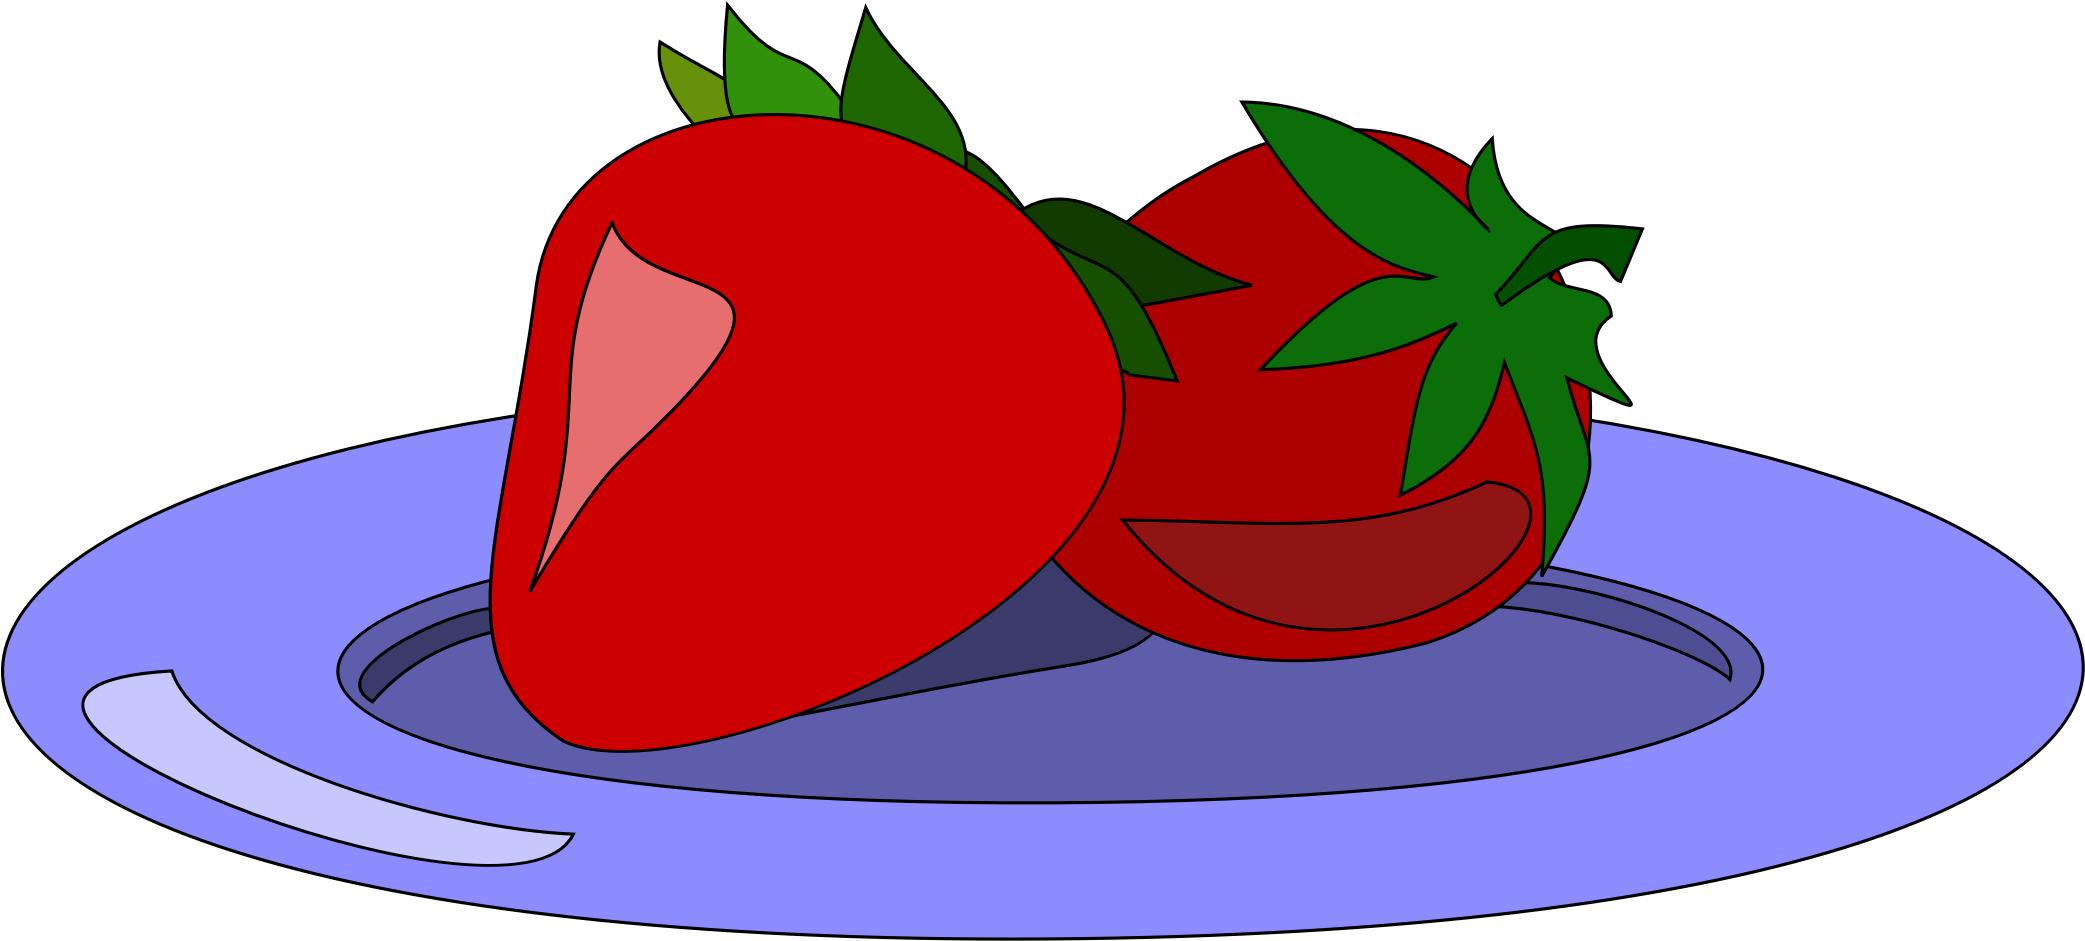 Strawberries on a plate png